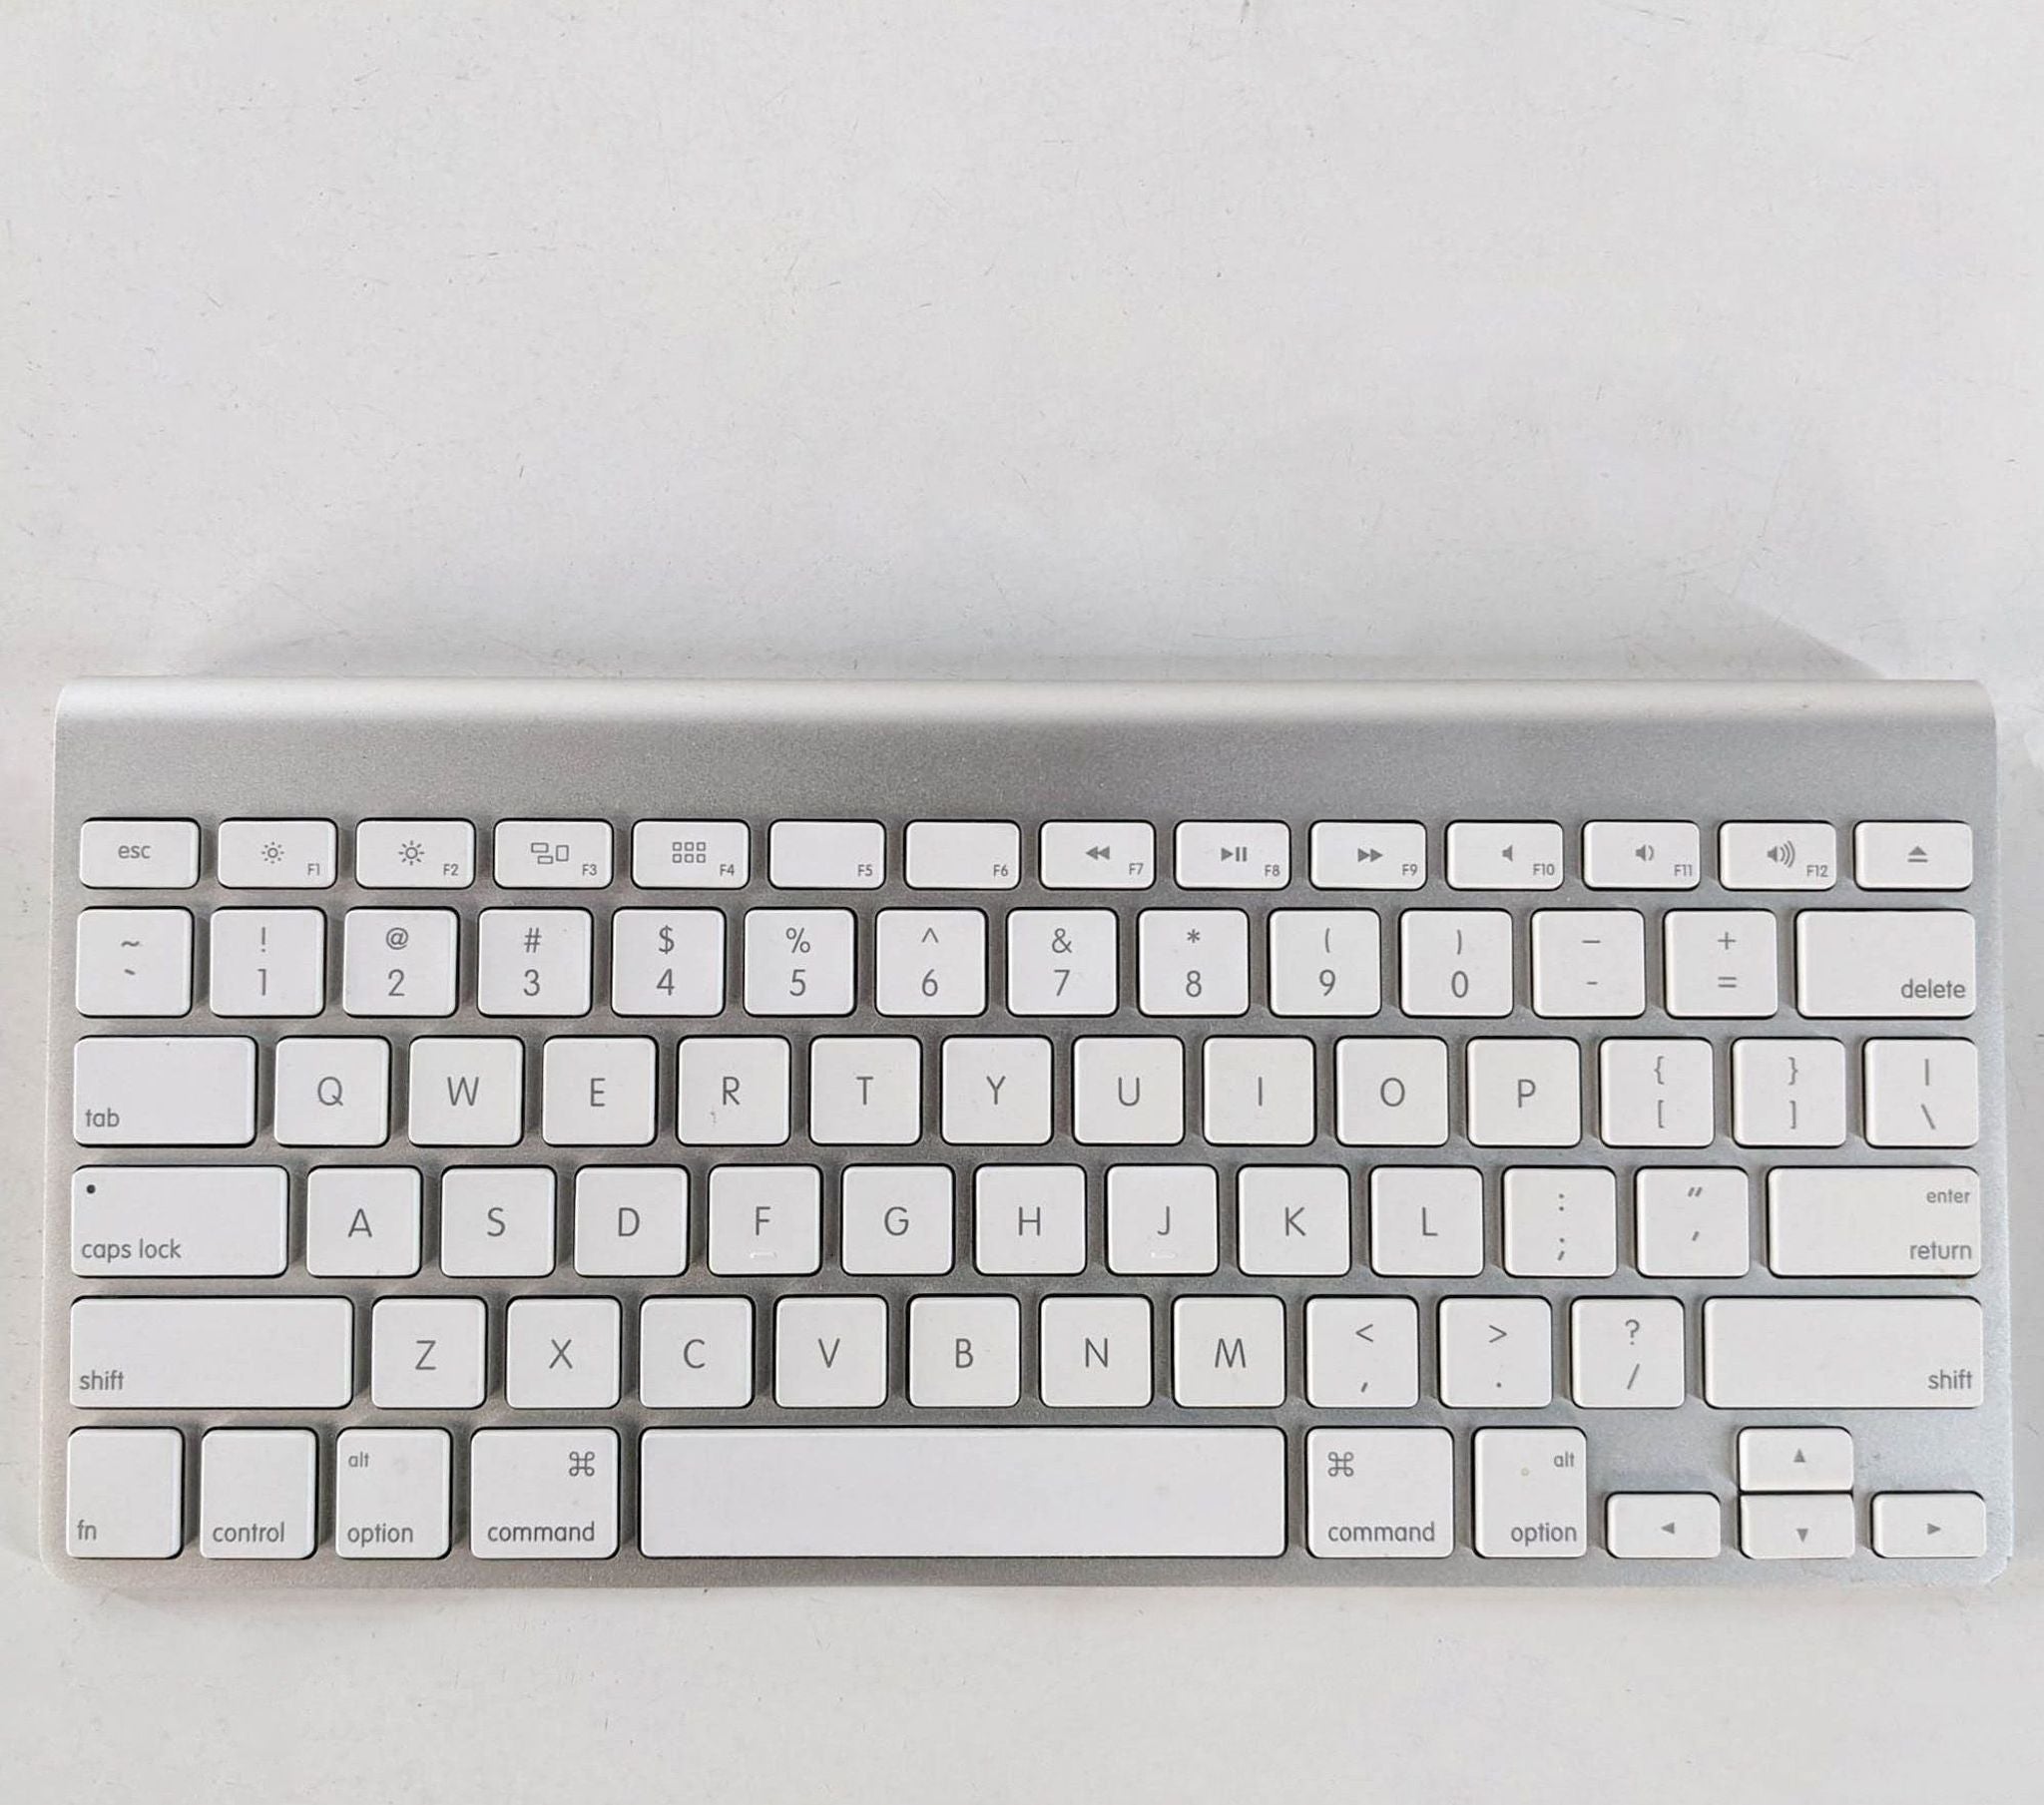 Alt text 1: Apple brand wireless keyboard on white surface, showing a clean design with grey and white keys.